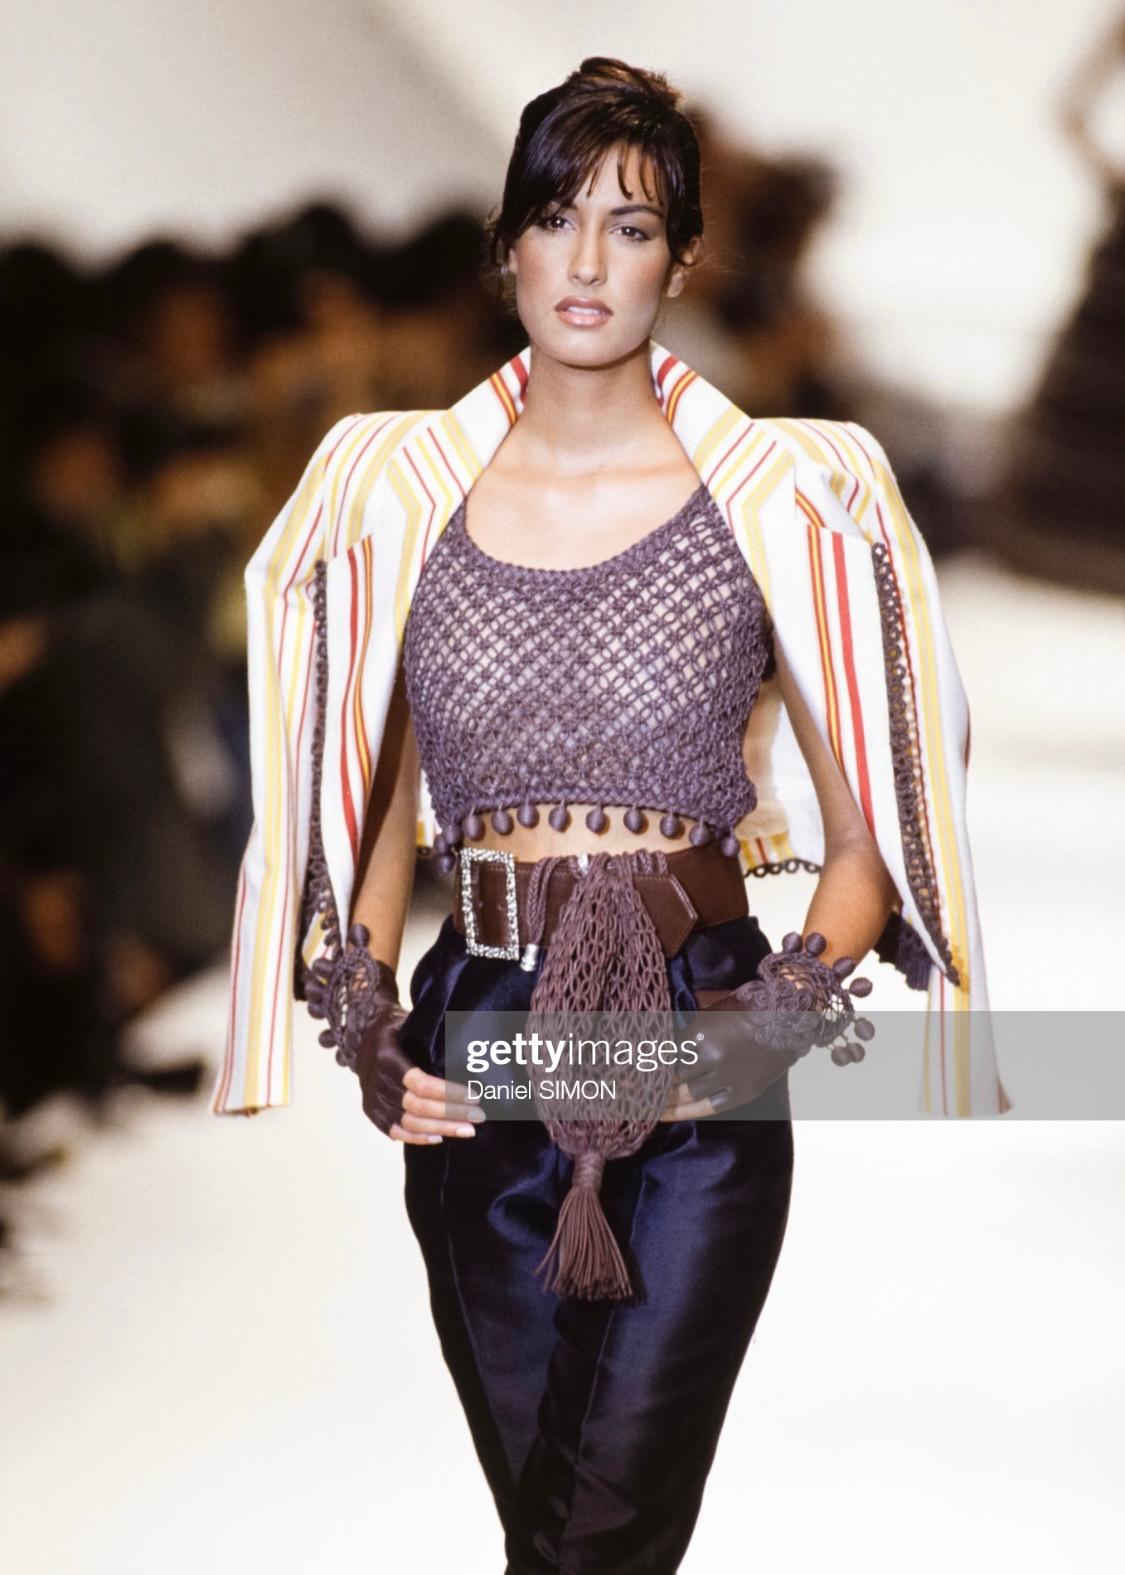 Presenting a three-piece demi-couture skirt suit designed by Gianfranco Ferré for Christian Dior's Spring/Summer 1994 collection. This piece features brown waxed cord braiding on the front of the crop-top that continues to the trim of the matching